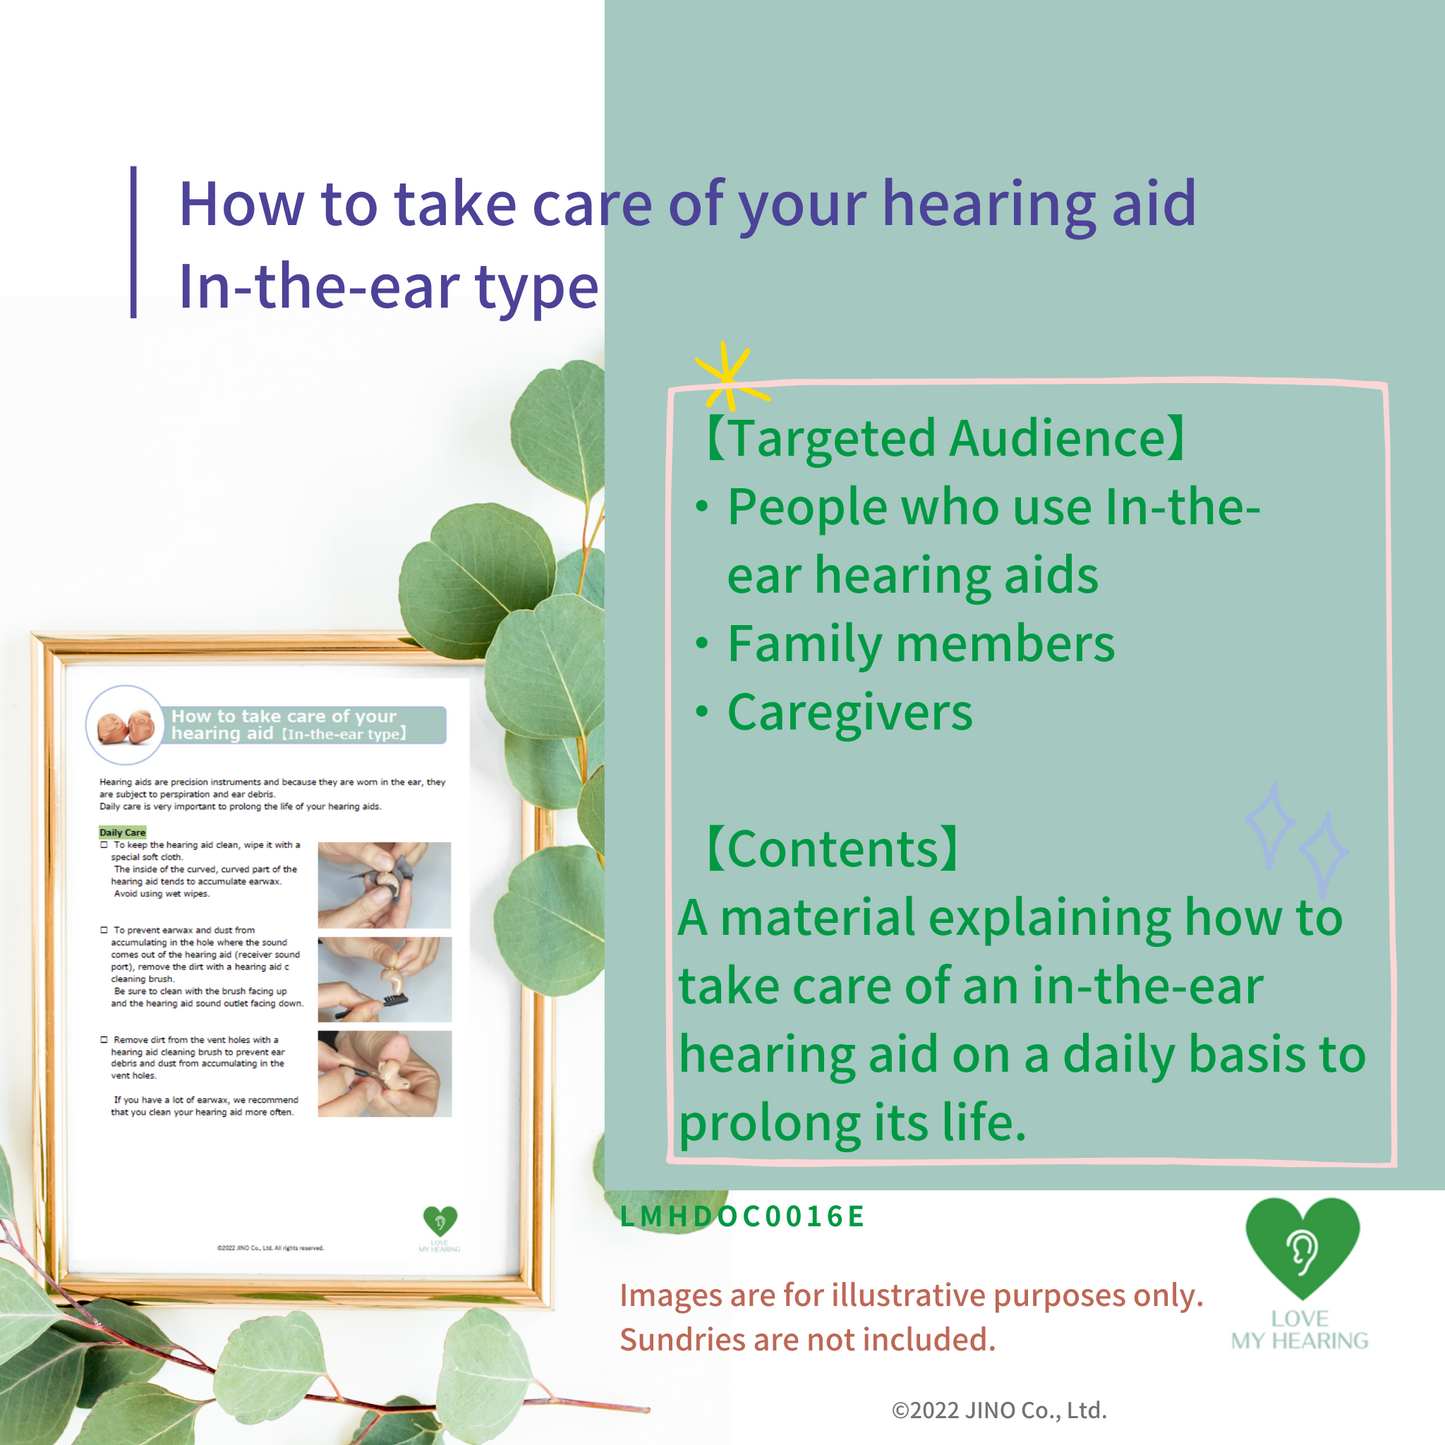 How to take care of your hearing aid【In-the-ear type】